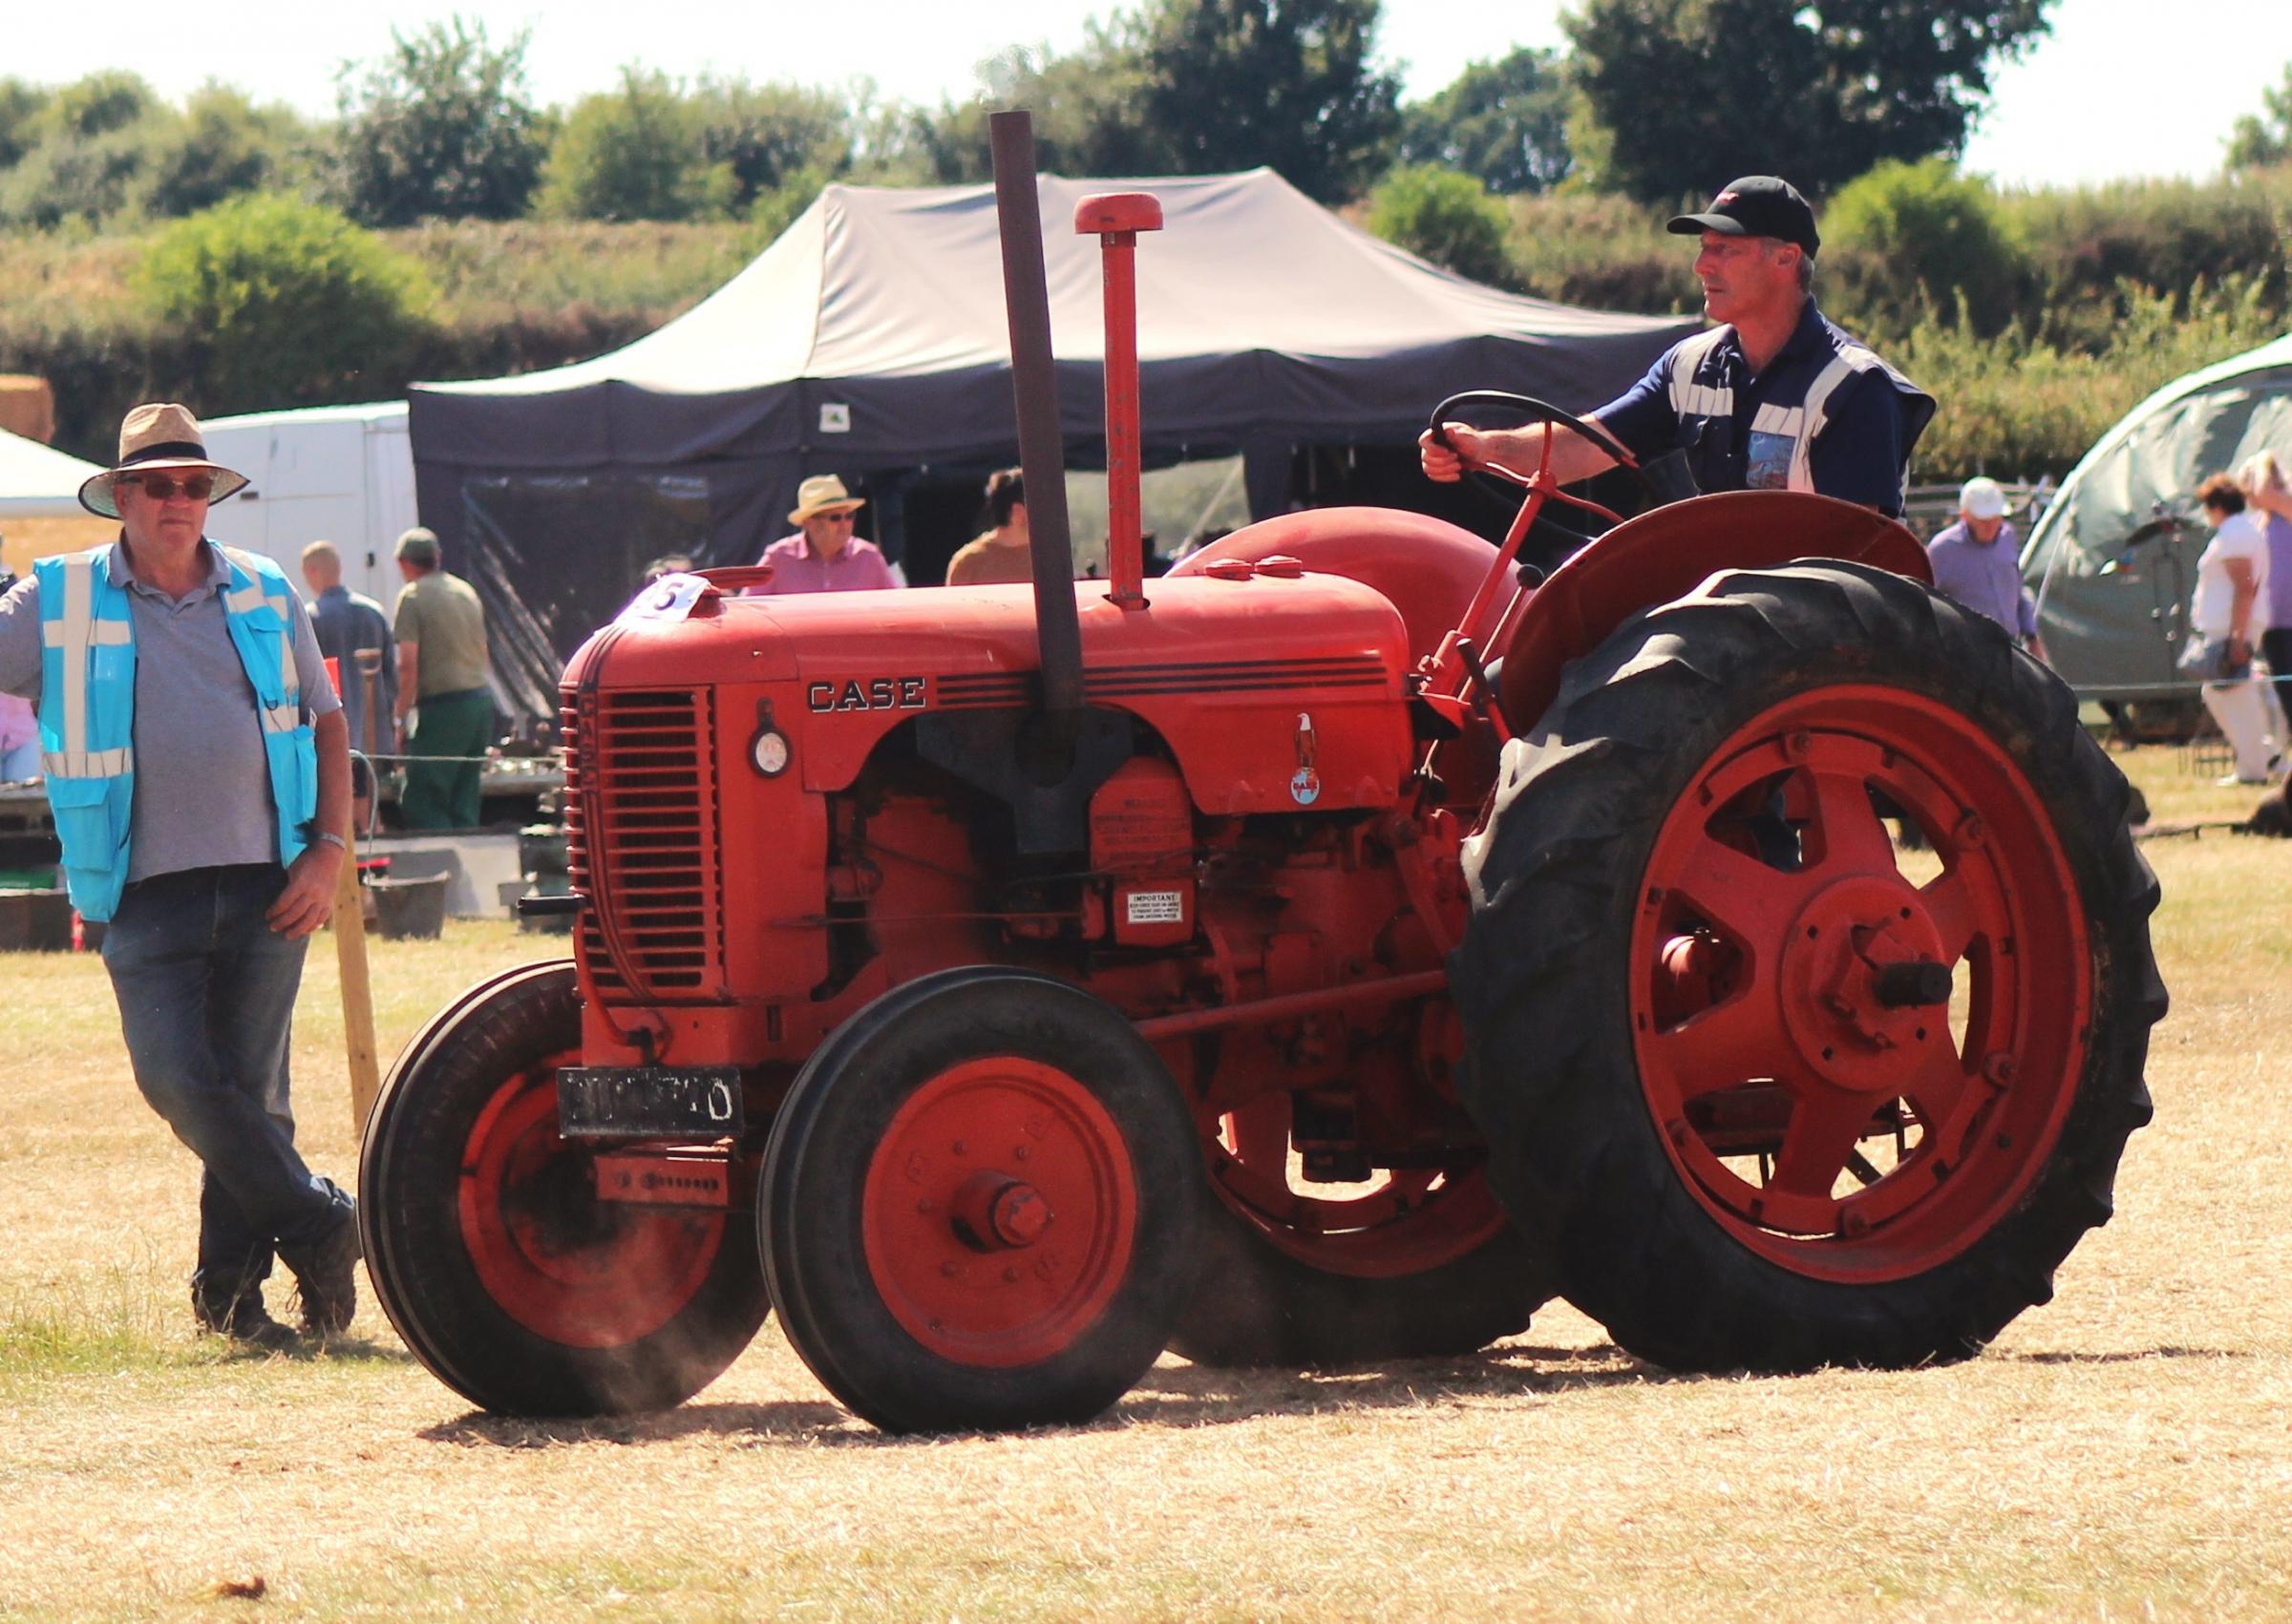 The Case DC4 owned by Nicola Edwards of Bucknell driven by Edward Price